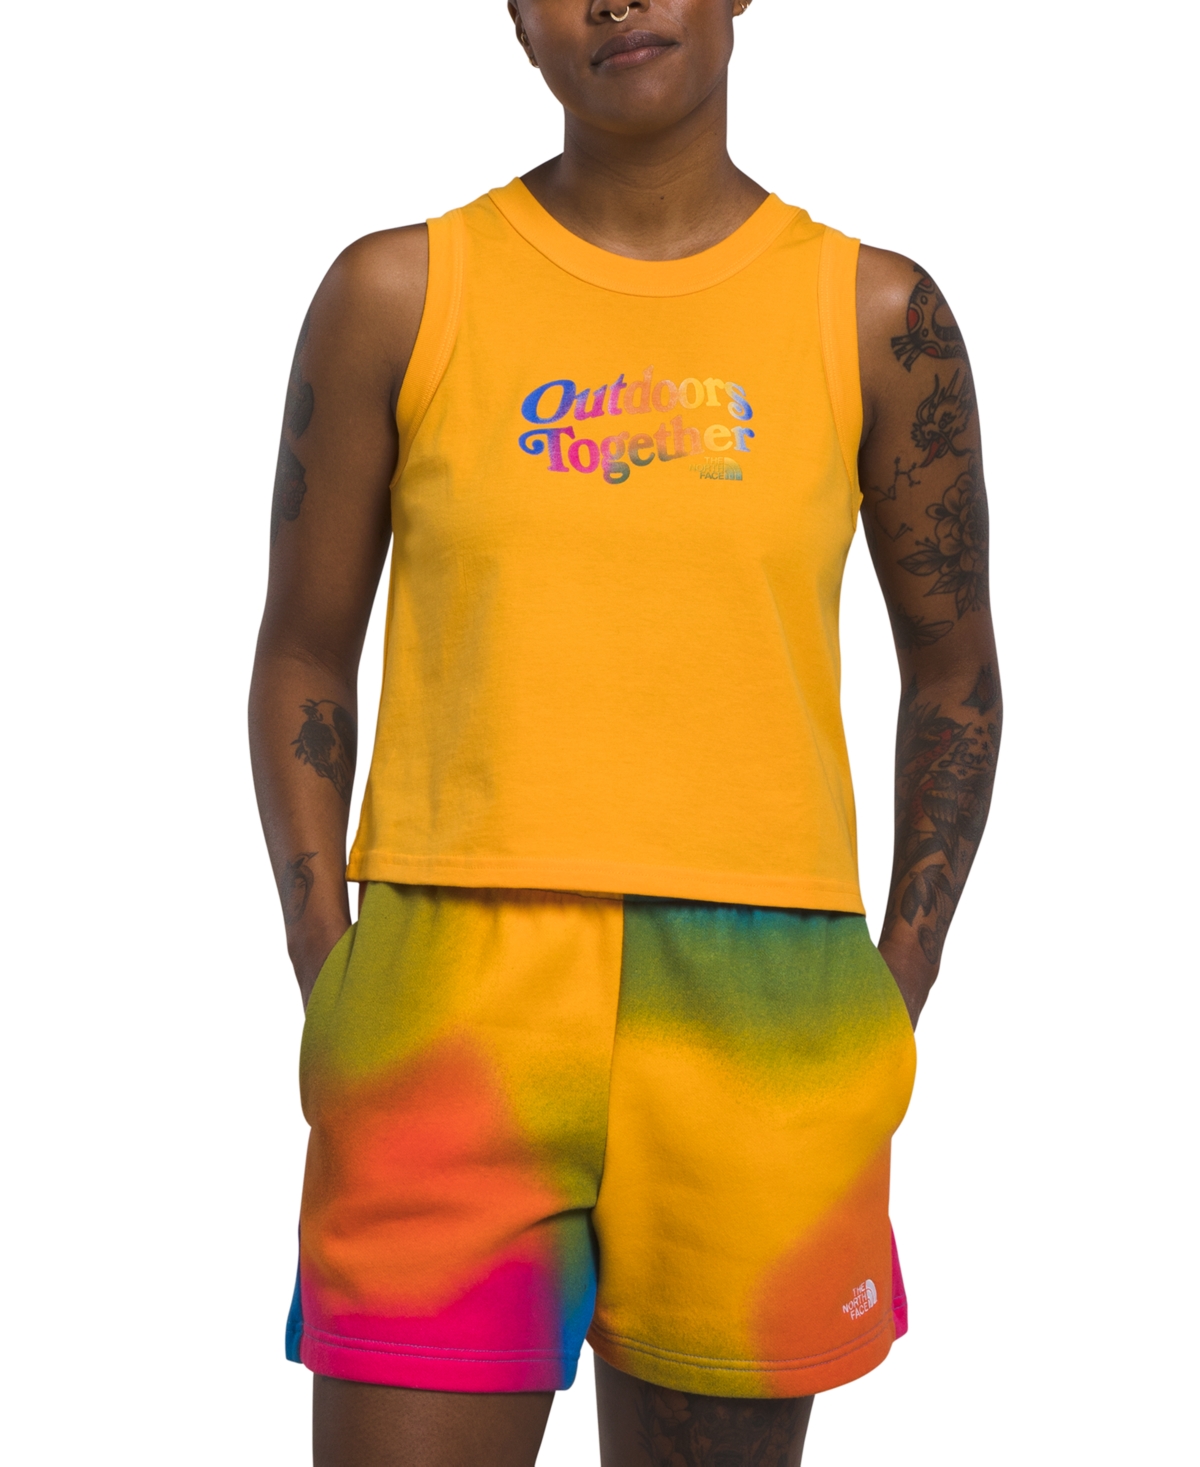 The North Face Women's Cotton Pride Graphic Tank Top In Summit Gold